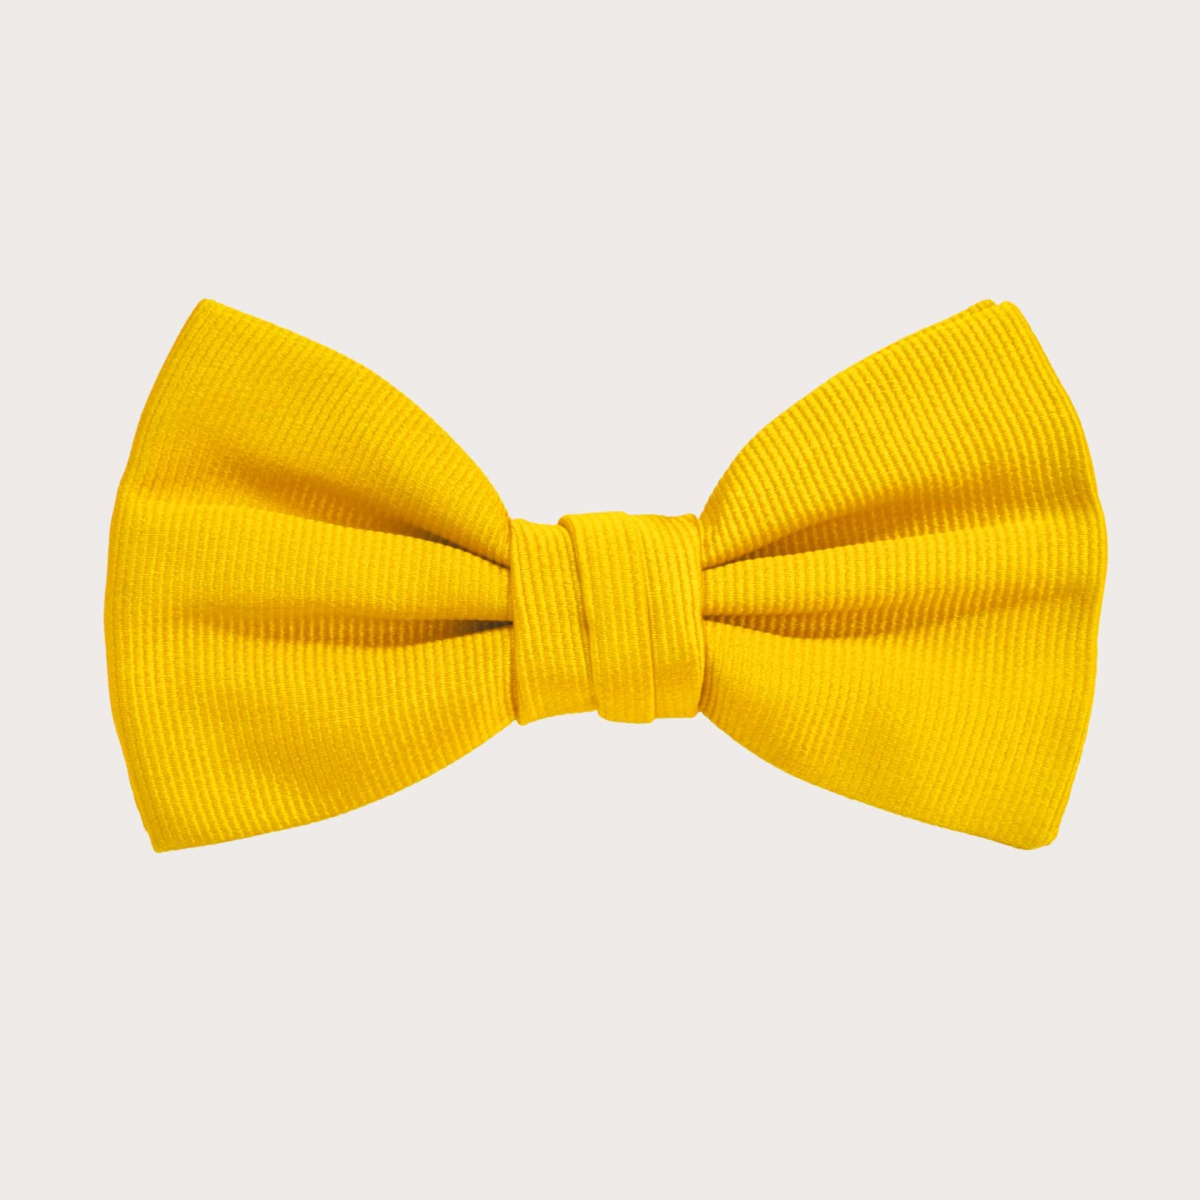 BRUCLE Yellow bow tie in jacquard silk